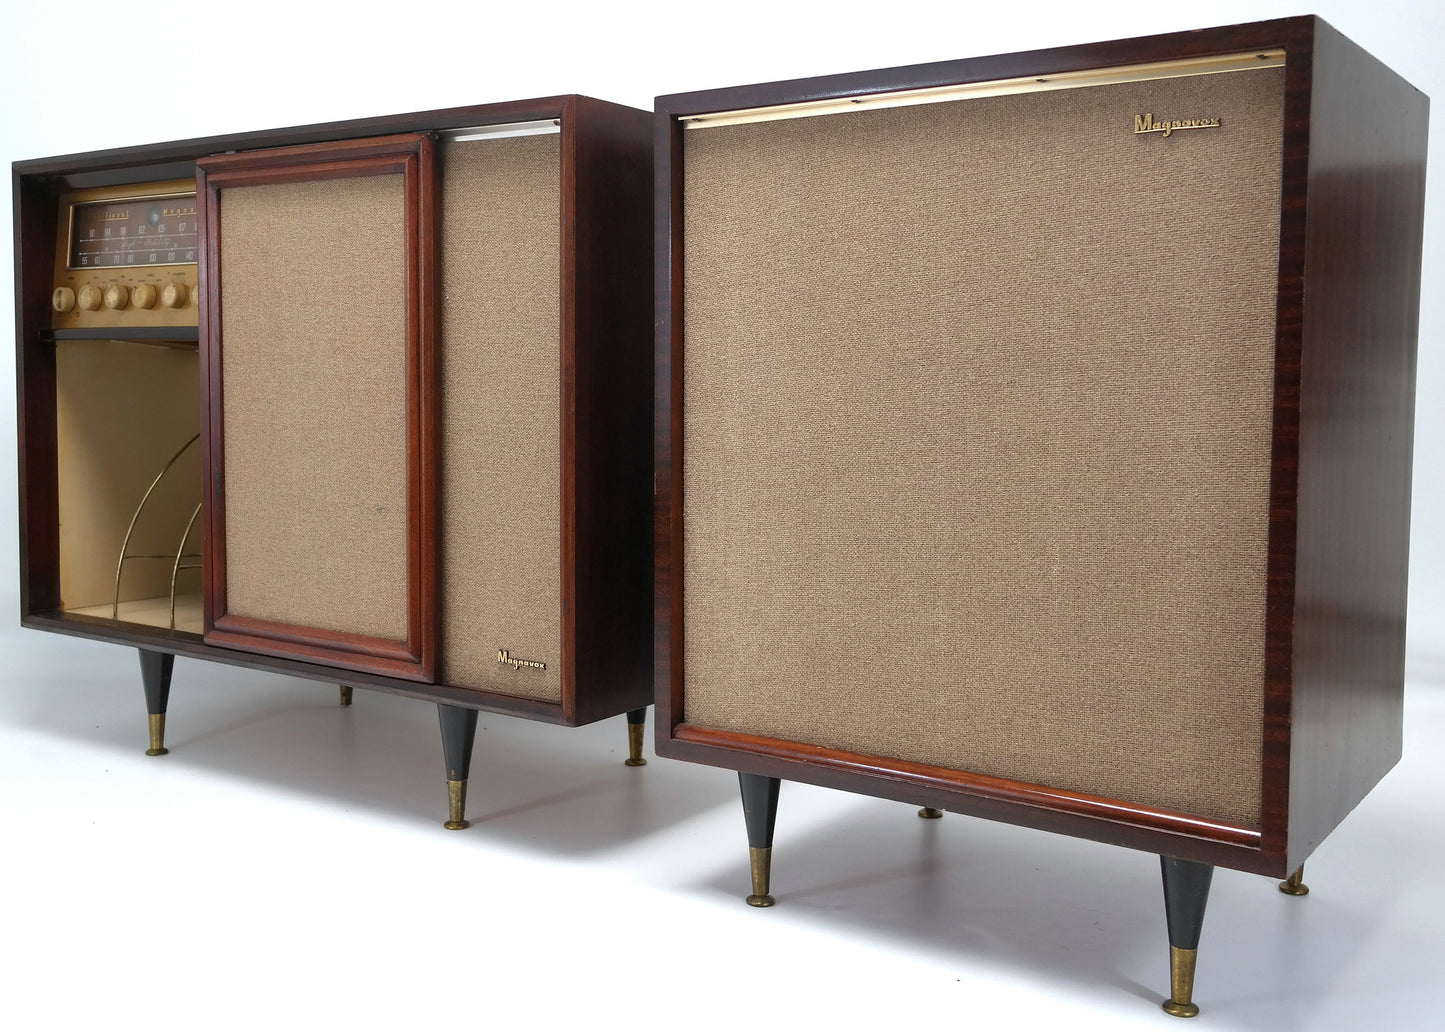 Mid Century Modern Magnavox Stereo Console with Extension Speaker - Record Player - Bluetooth - Tuner The Vintedge Co.